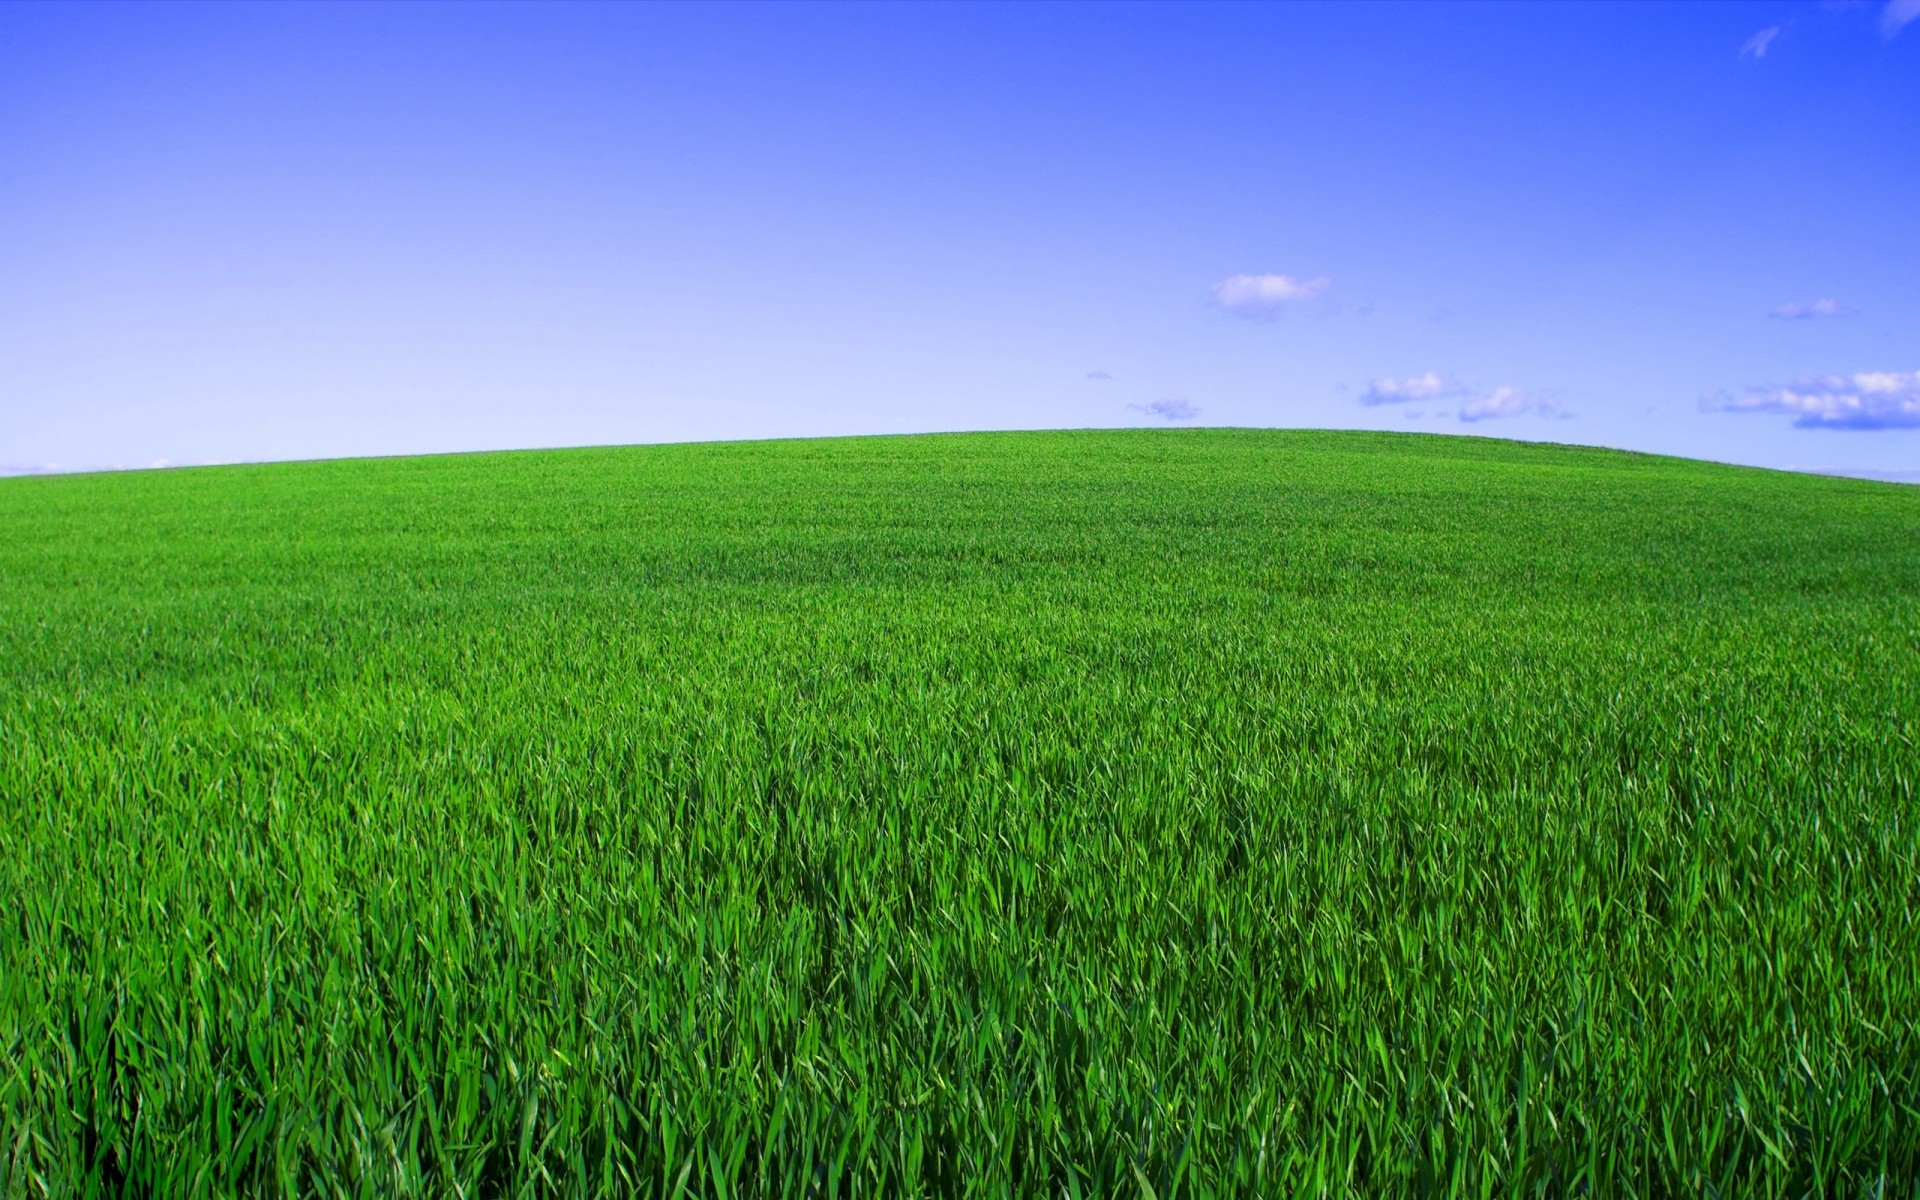 landscapes field rural grass farm pasture hayfield countryside growth horizon landscape agriculture soil nature lawn summer fair weather sun idyllic green sky